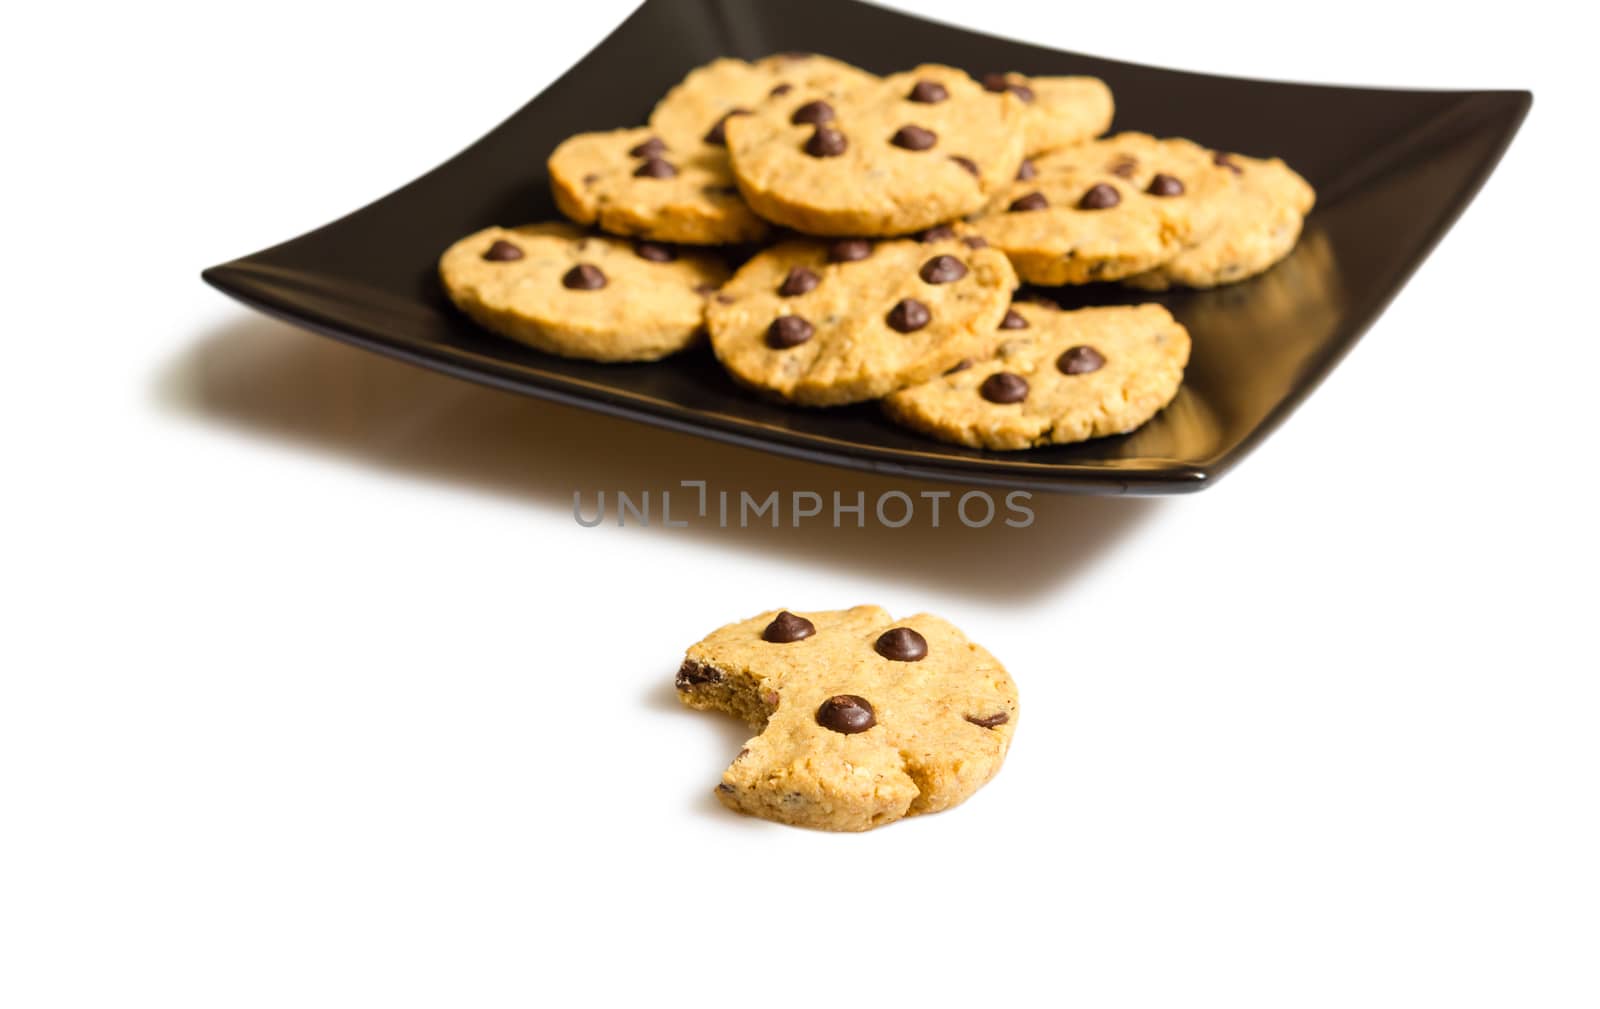 Chocolate chip cookies on a black plate by doble.d